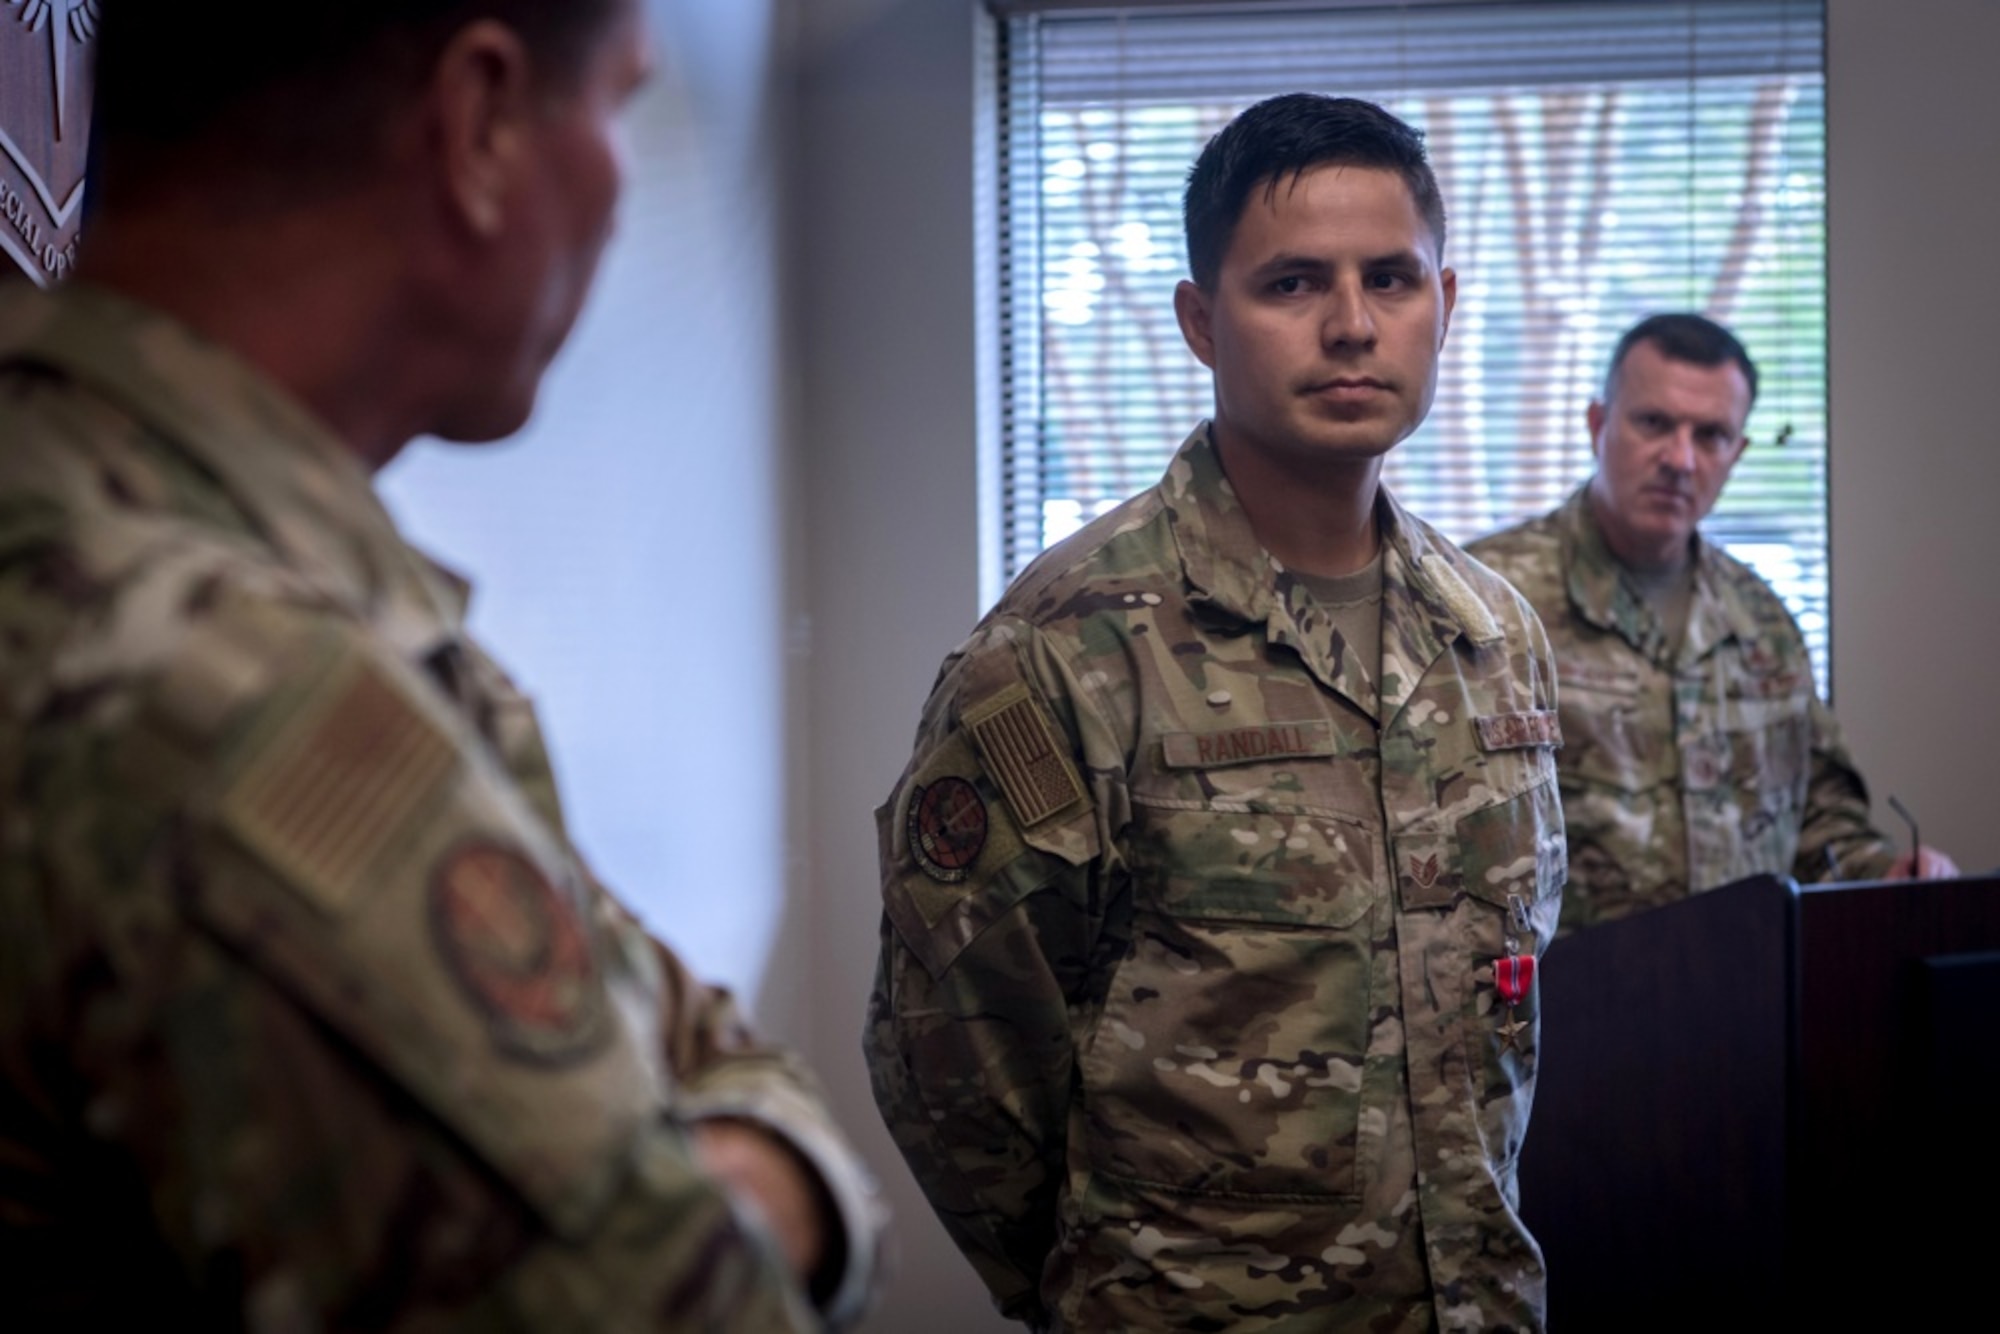 An airman, right, looks at his commander ,left, as he gives comments.